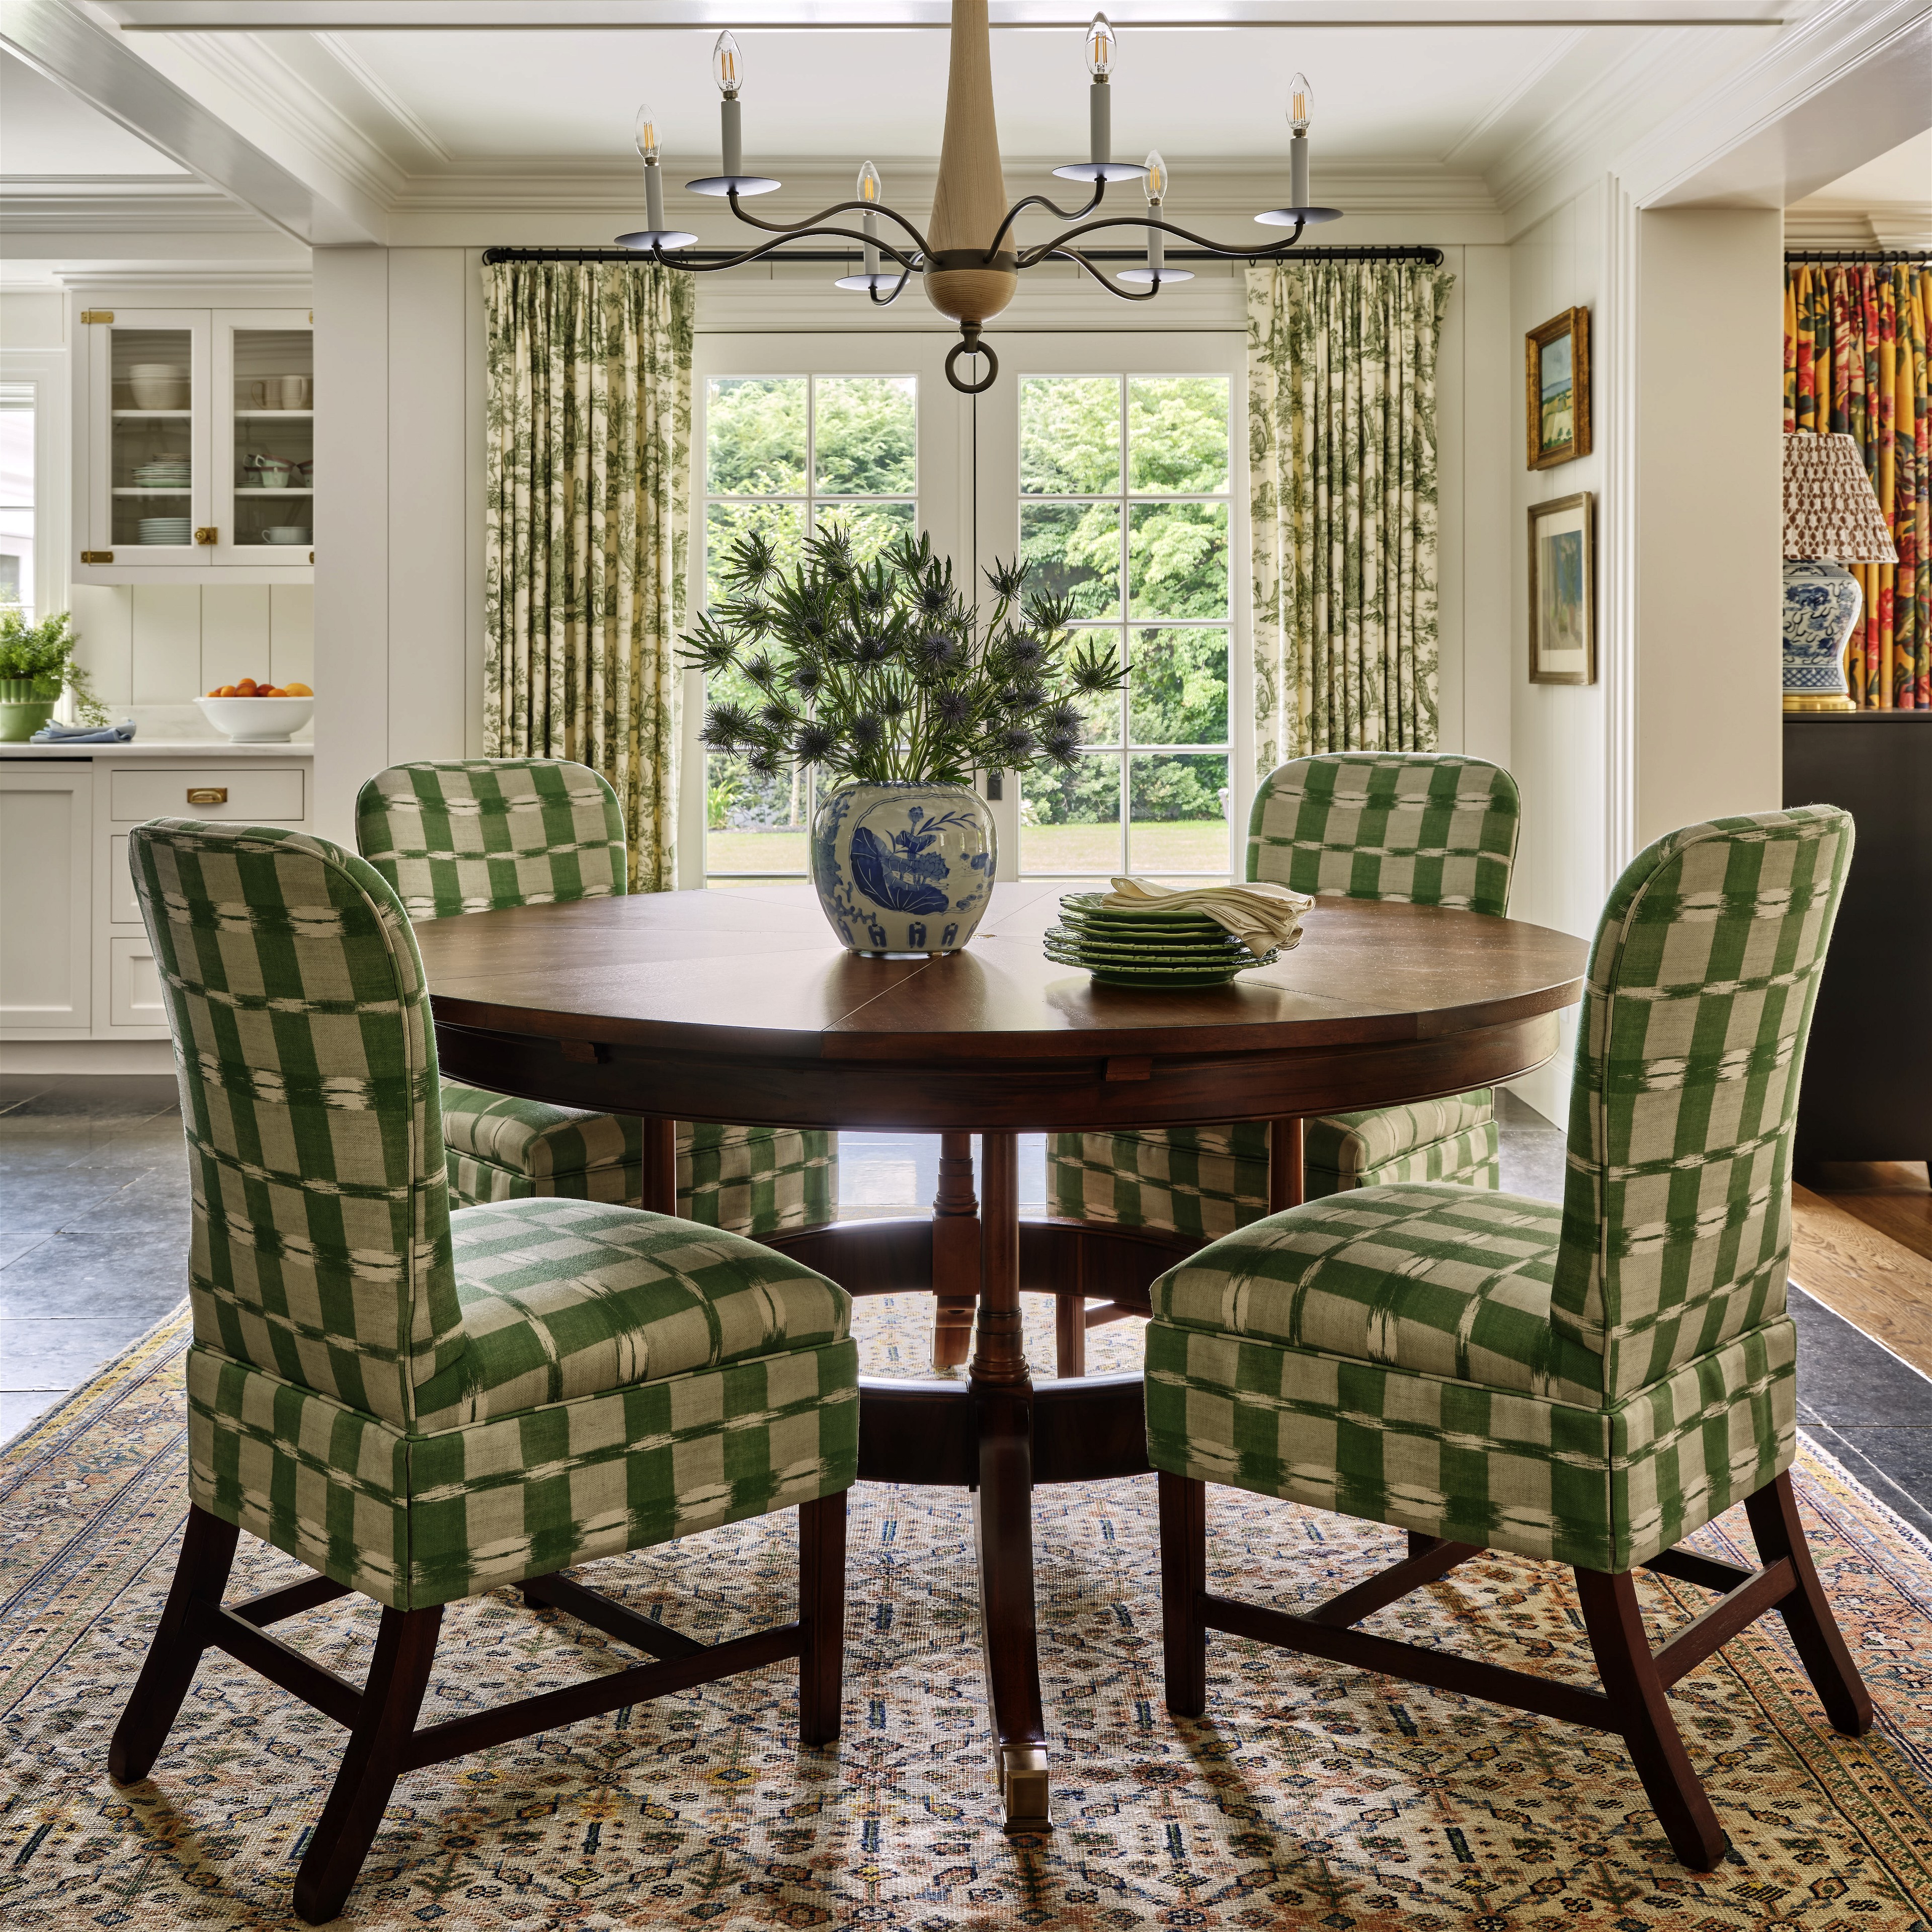 a dining room table with green chairs and a chandelier